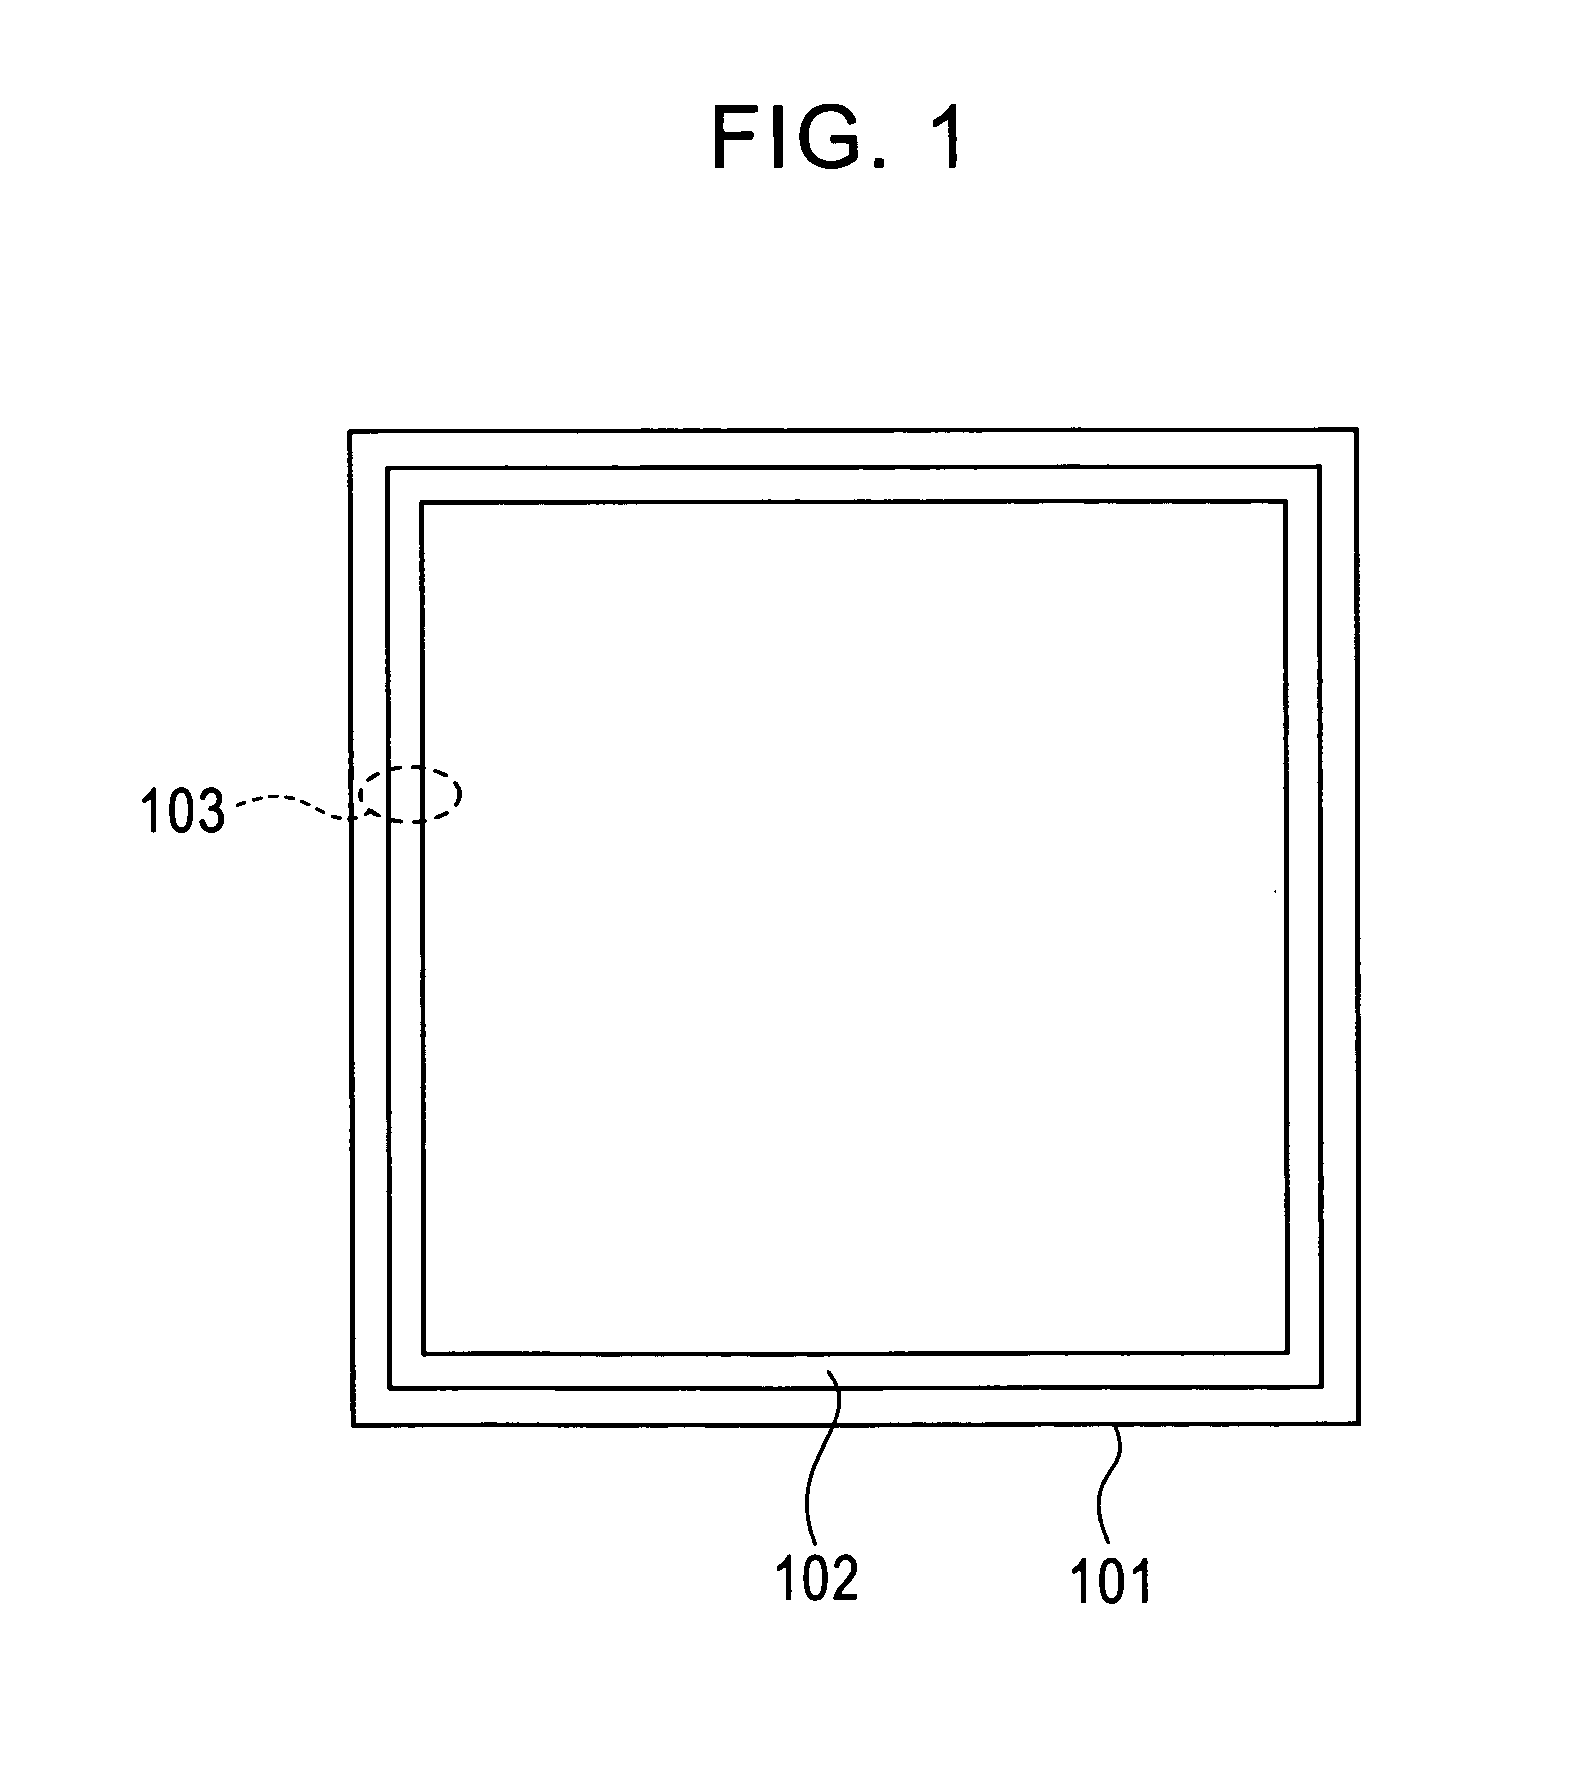 Semiconductor device having isolated pockets of insulation in conductive seal ring